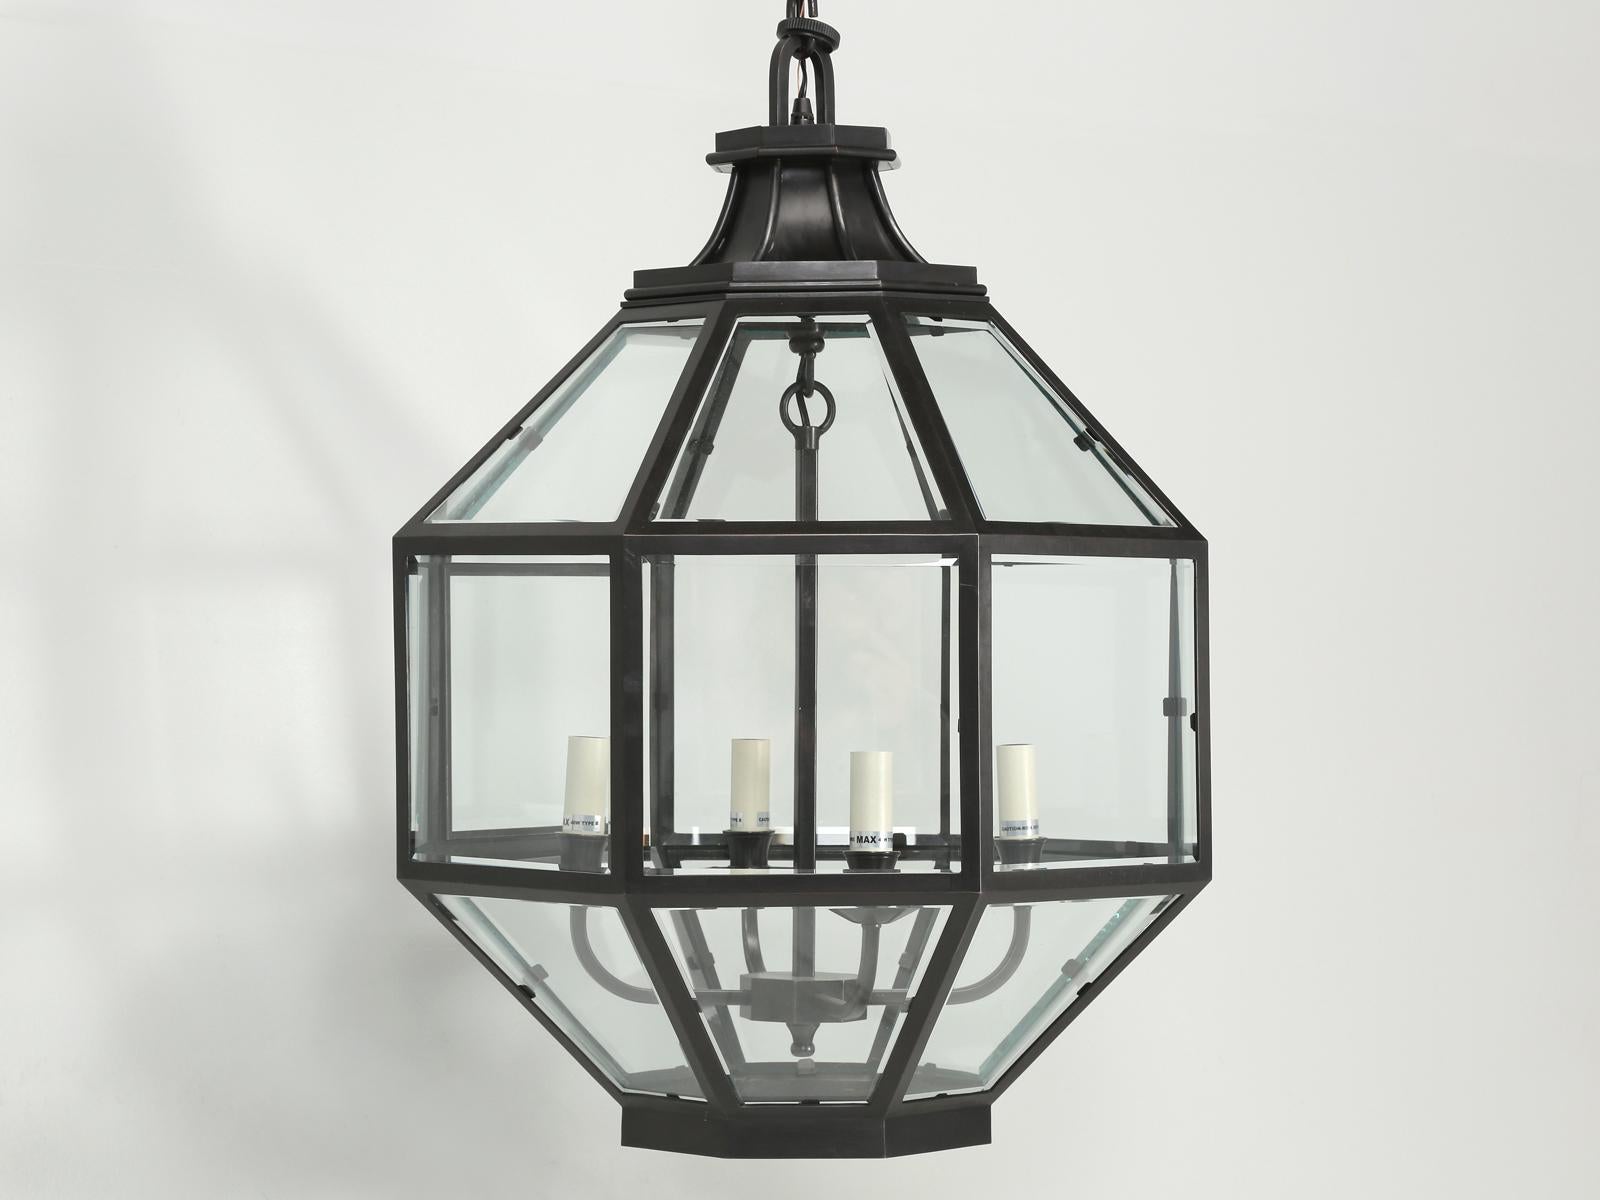 Mr. Edwards was an antiques dealer for over 50 years and has an extensive knowledge of vintage lighting. In 1992 after speaking with renowned designer David Easton, Charles agreed to copy one of his lanterns and thus a business began. All of the